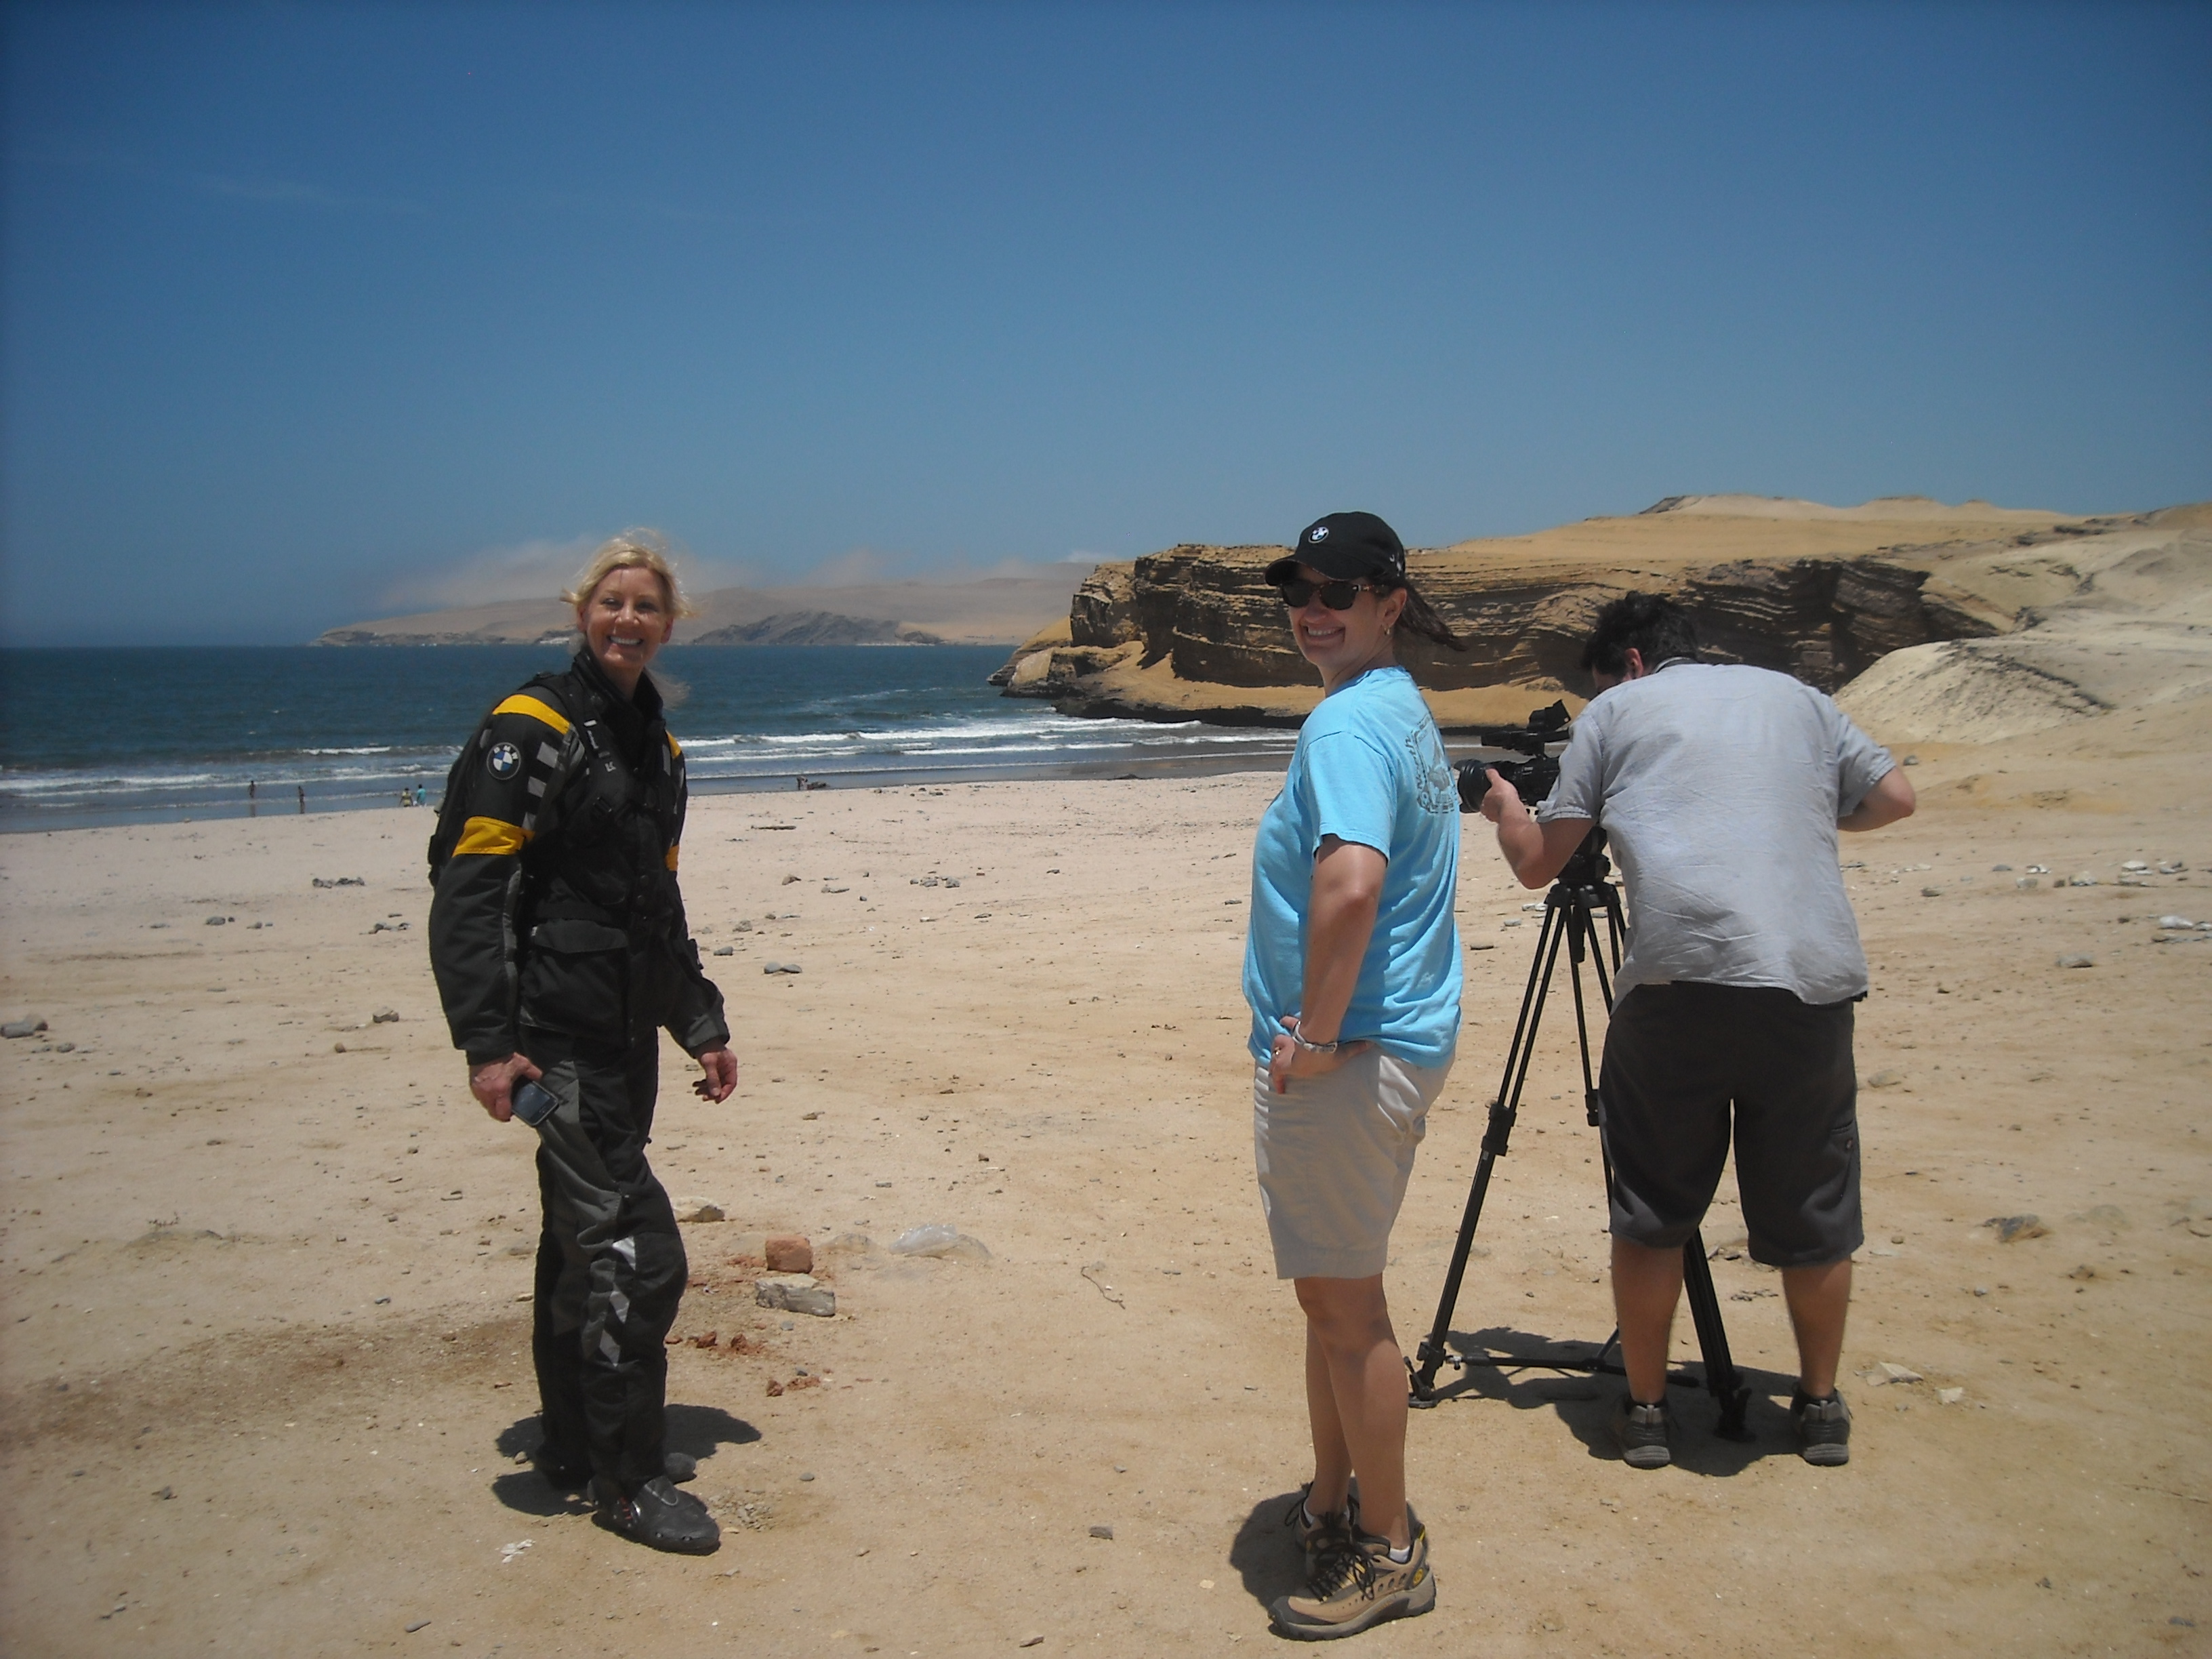 On location in Peru with Producer Linda Midgett and Camera Man Jim Pappas